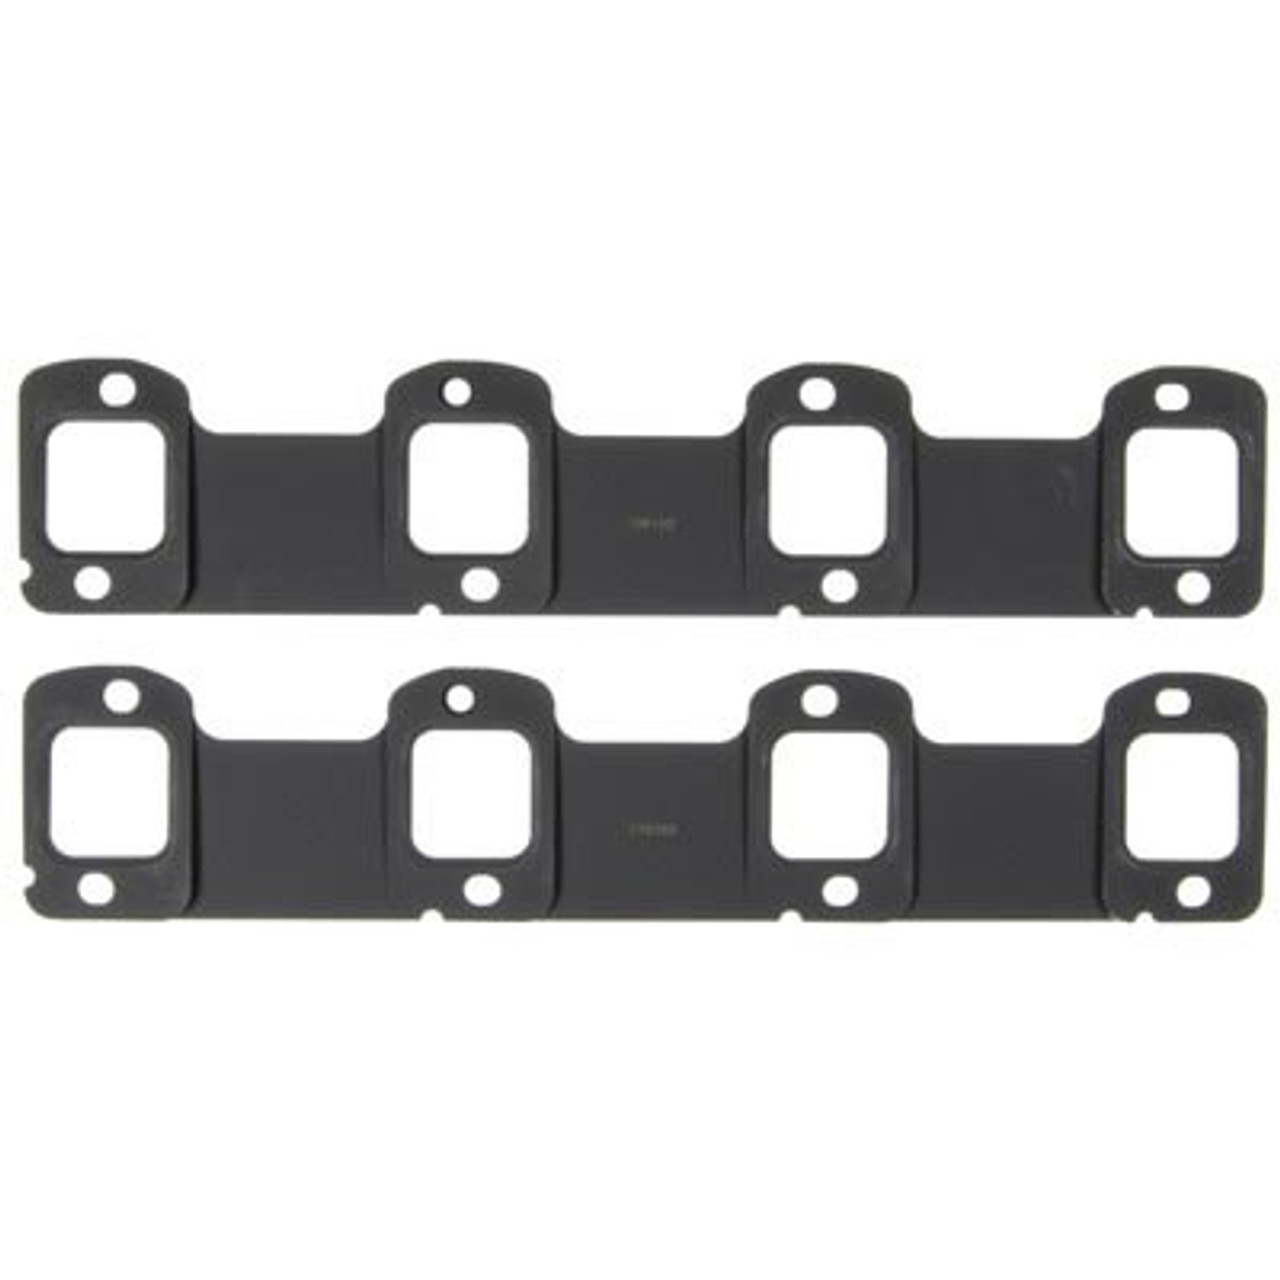 Mahle Exhaust Manifold Gasket Set 2011 to 2014 6.7L Powerstroke (MCIMS19880)-Main View